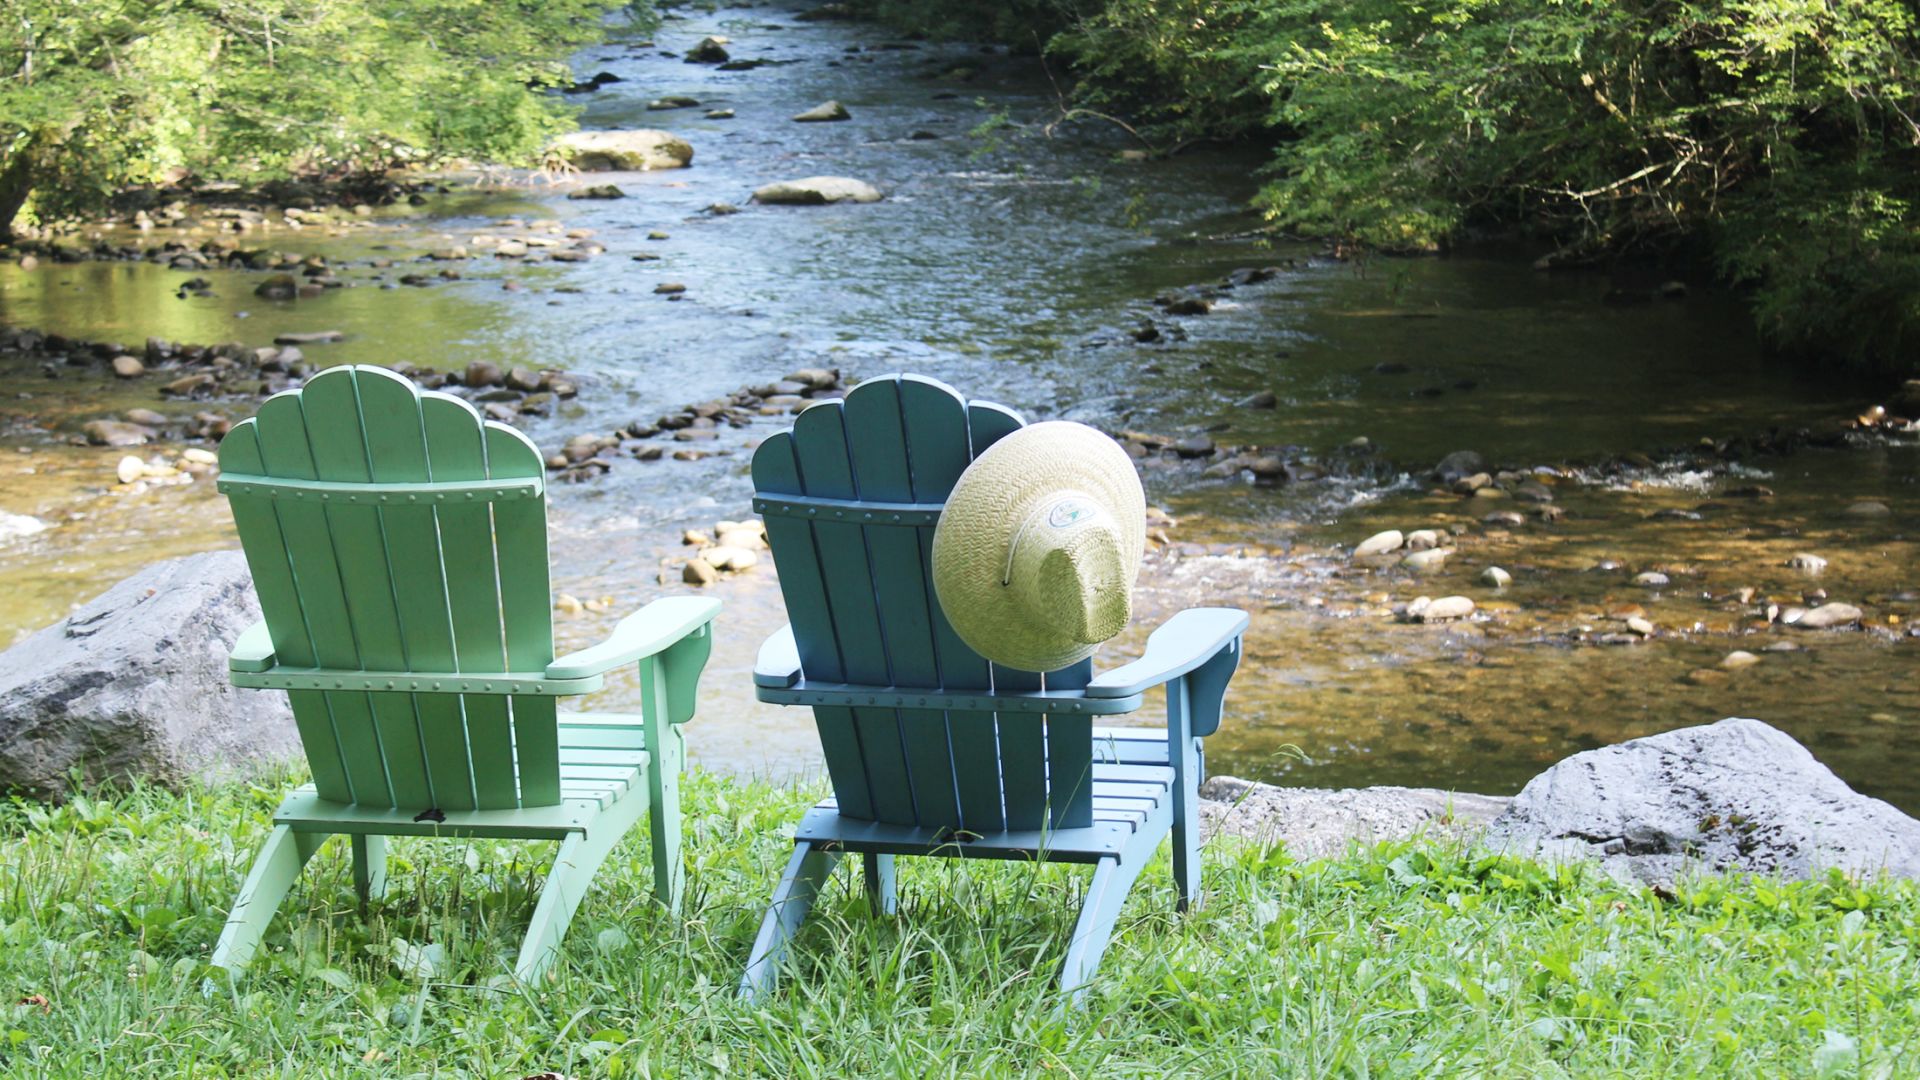 A Couple Of Chairs Next To A River With A Large Rock In The Middle